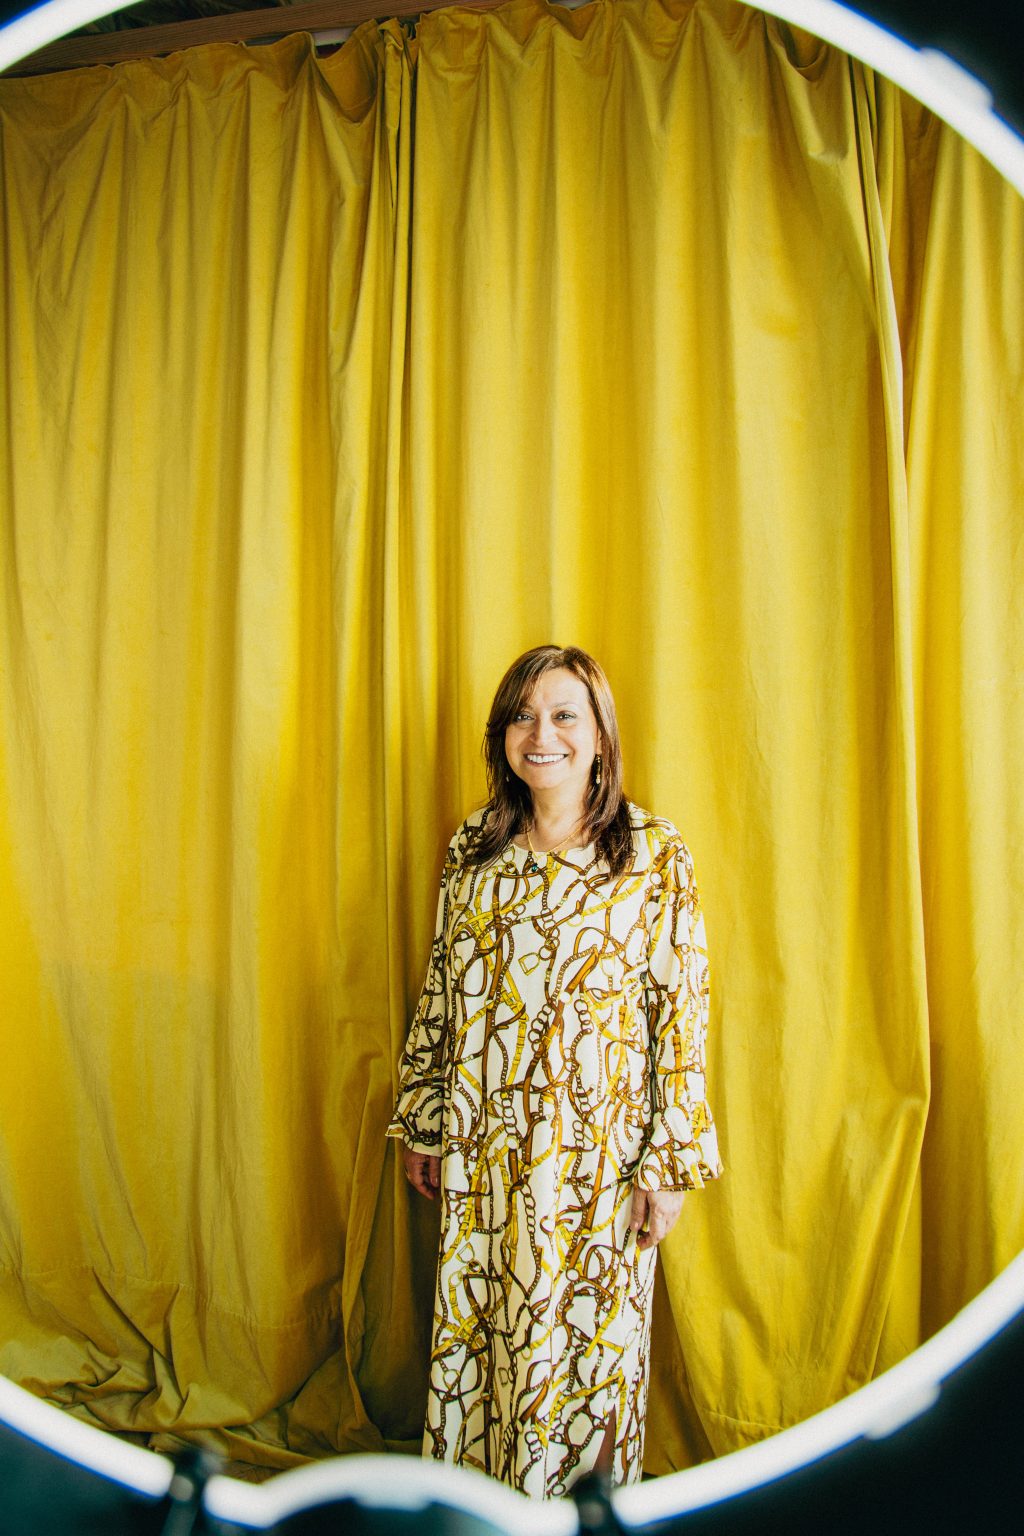 A woman stands in front of a yellow curtain. She is wearing gold jewellery and is smiling broadly. There is a white ring around the frame.